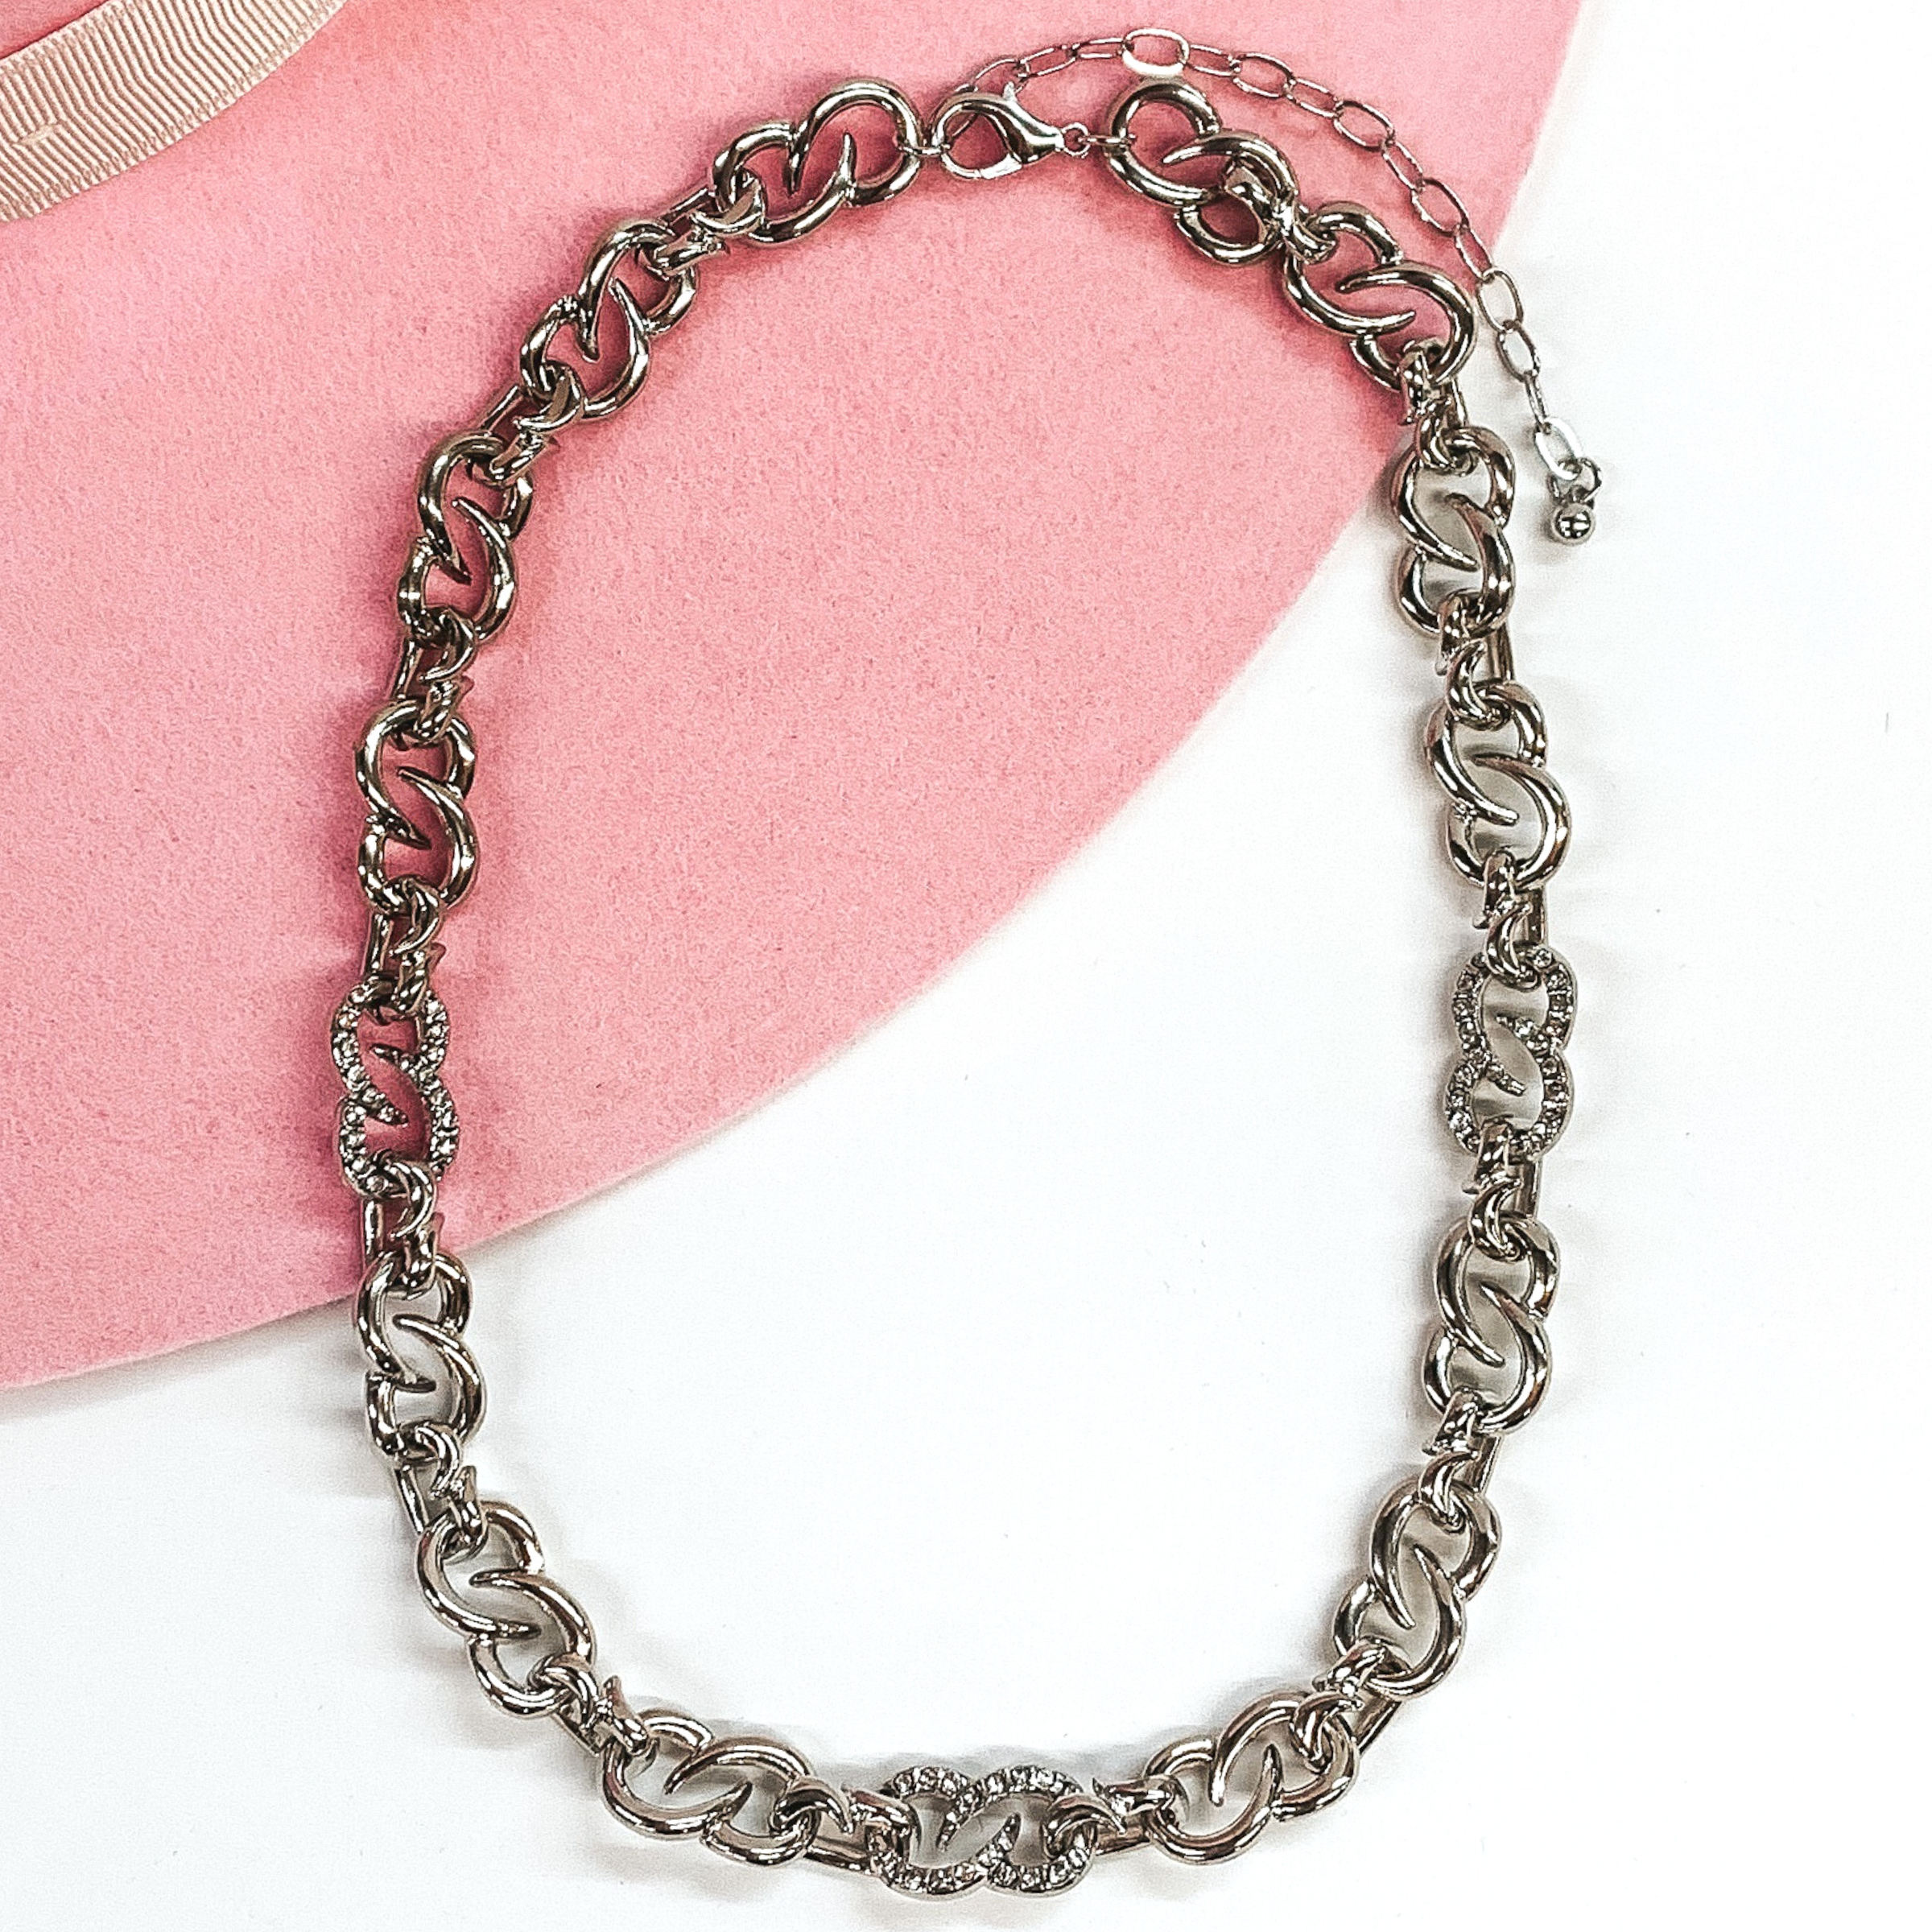 Thick silver infinity chain link necklace with three links that have clear crystals. this necklace is pictured on a white and pink background. 